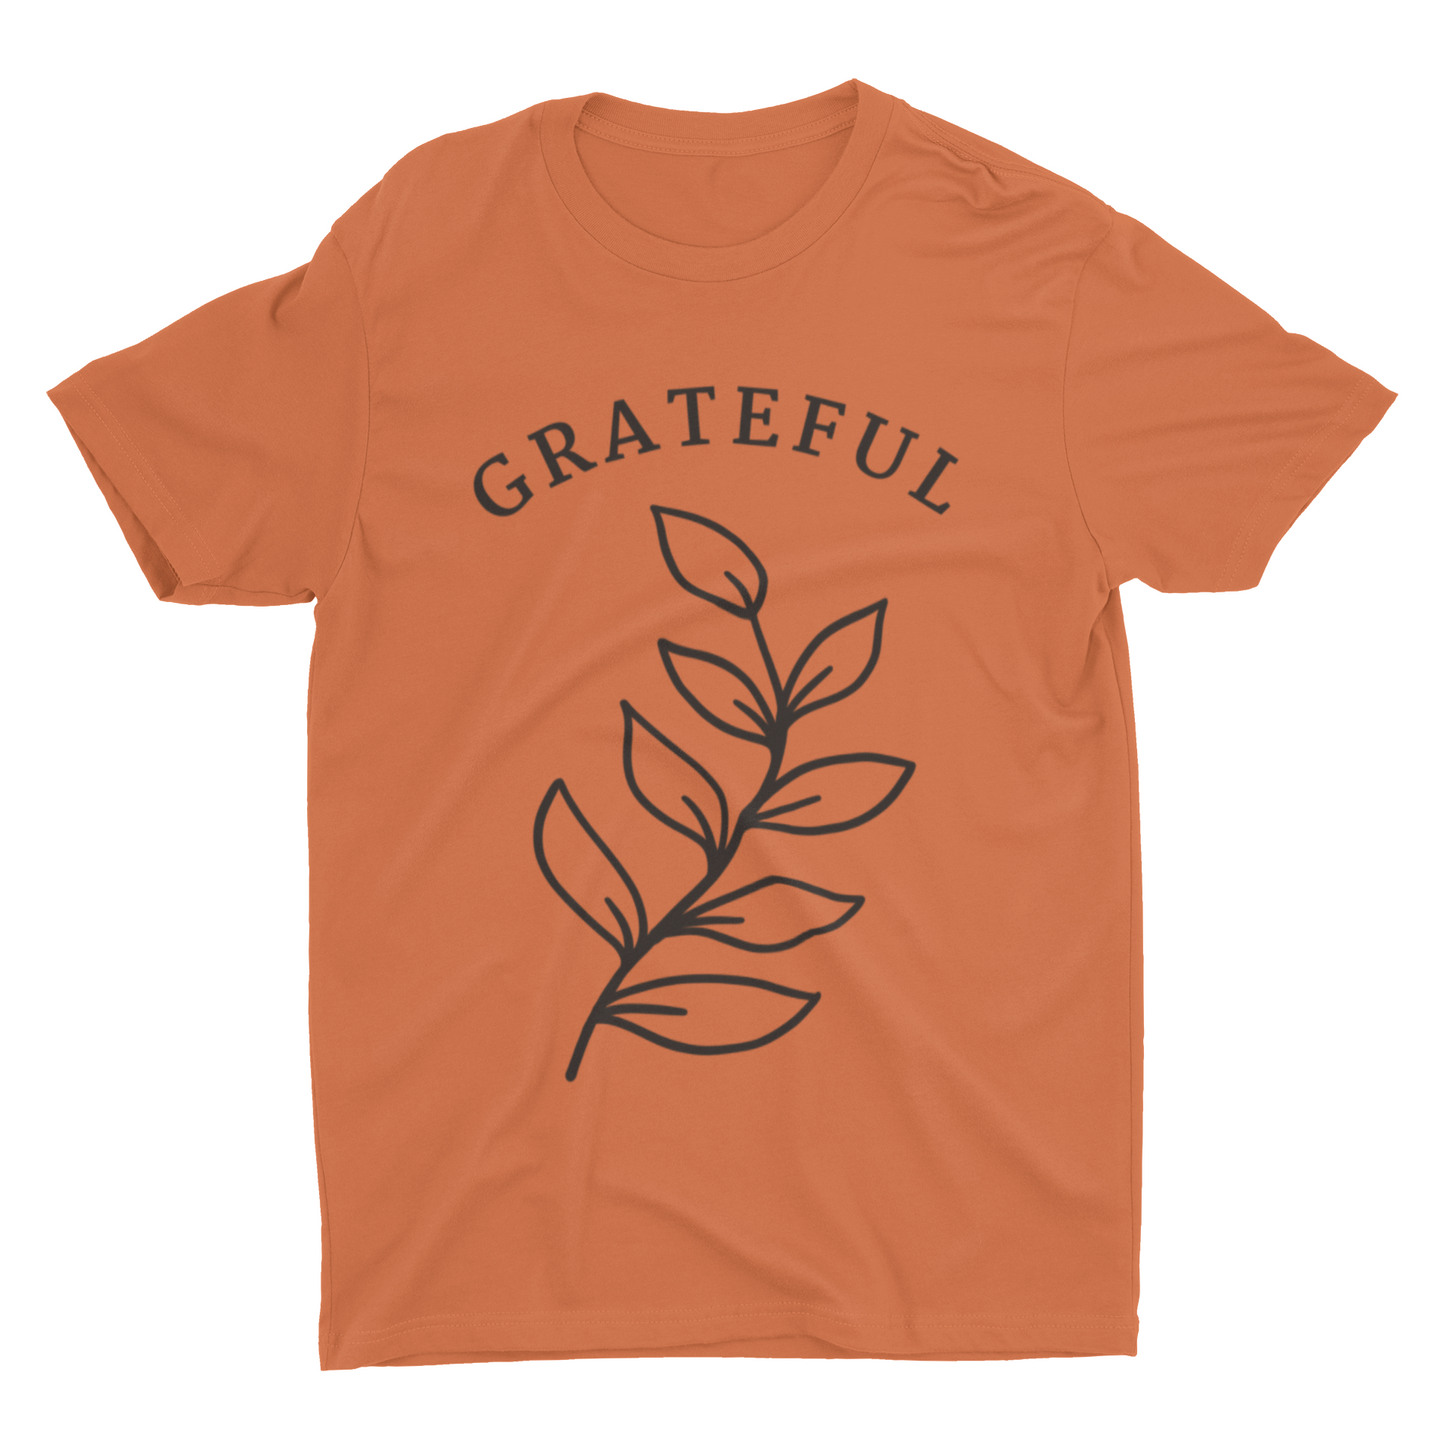 Grateful graphic t-shirt for fall